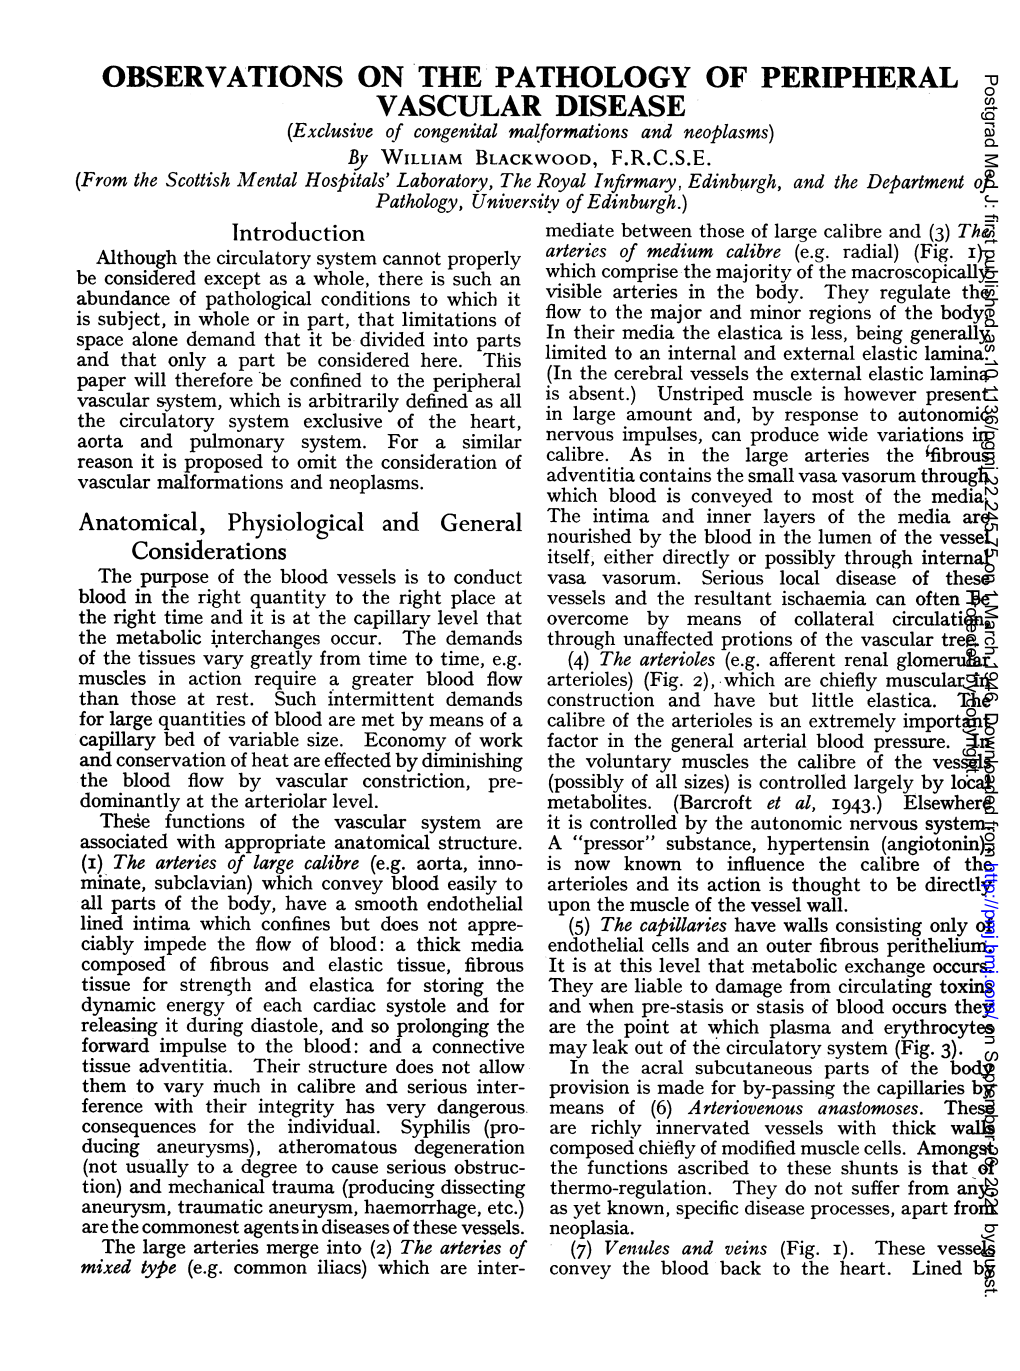 OBSERVATIONS on the PATHOLOGY of PERIPHERAL Postgrad Med J: First Published As 10.1136/Pgmj.22.245.75 on 1 March 1946